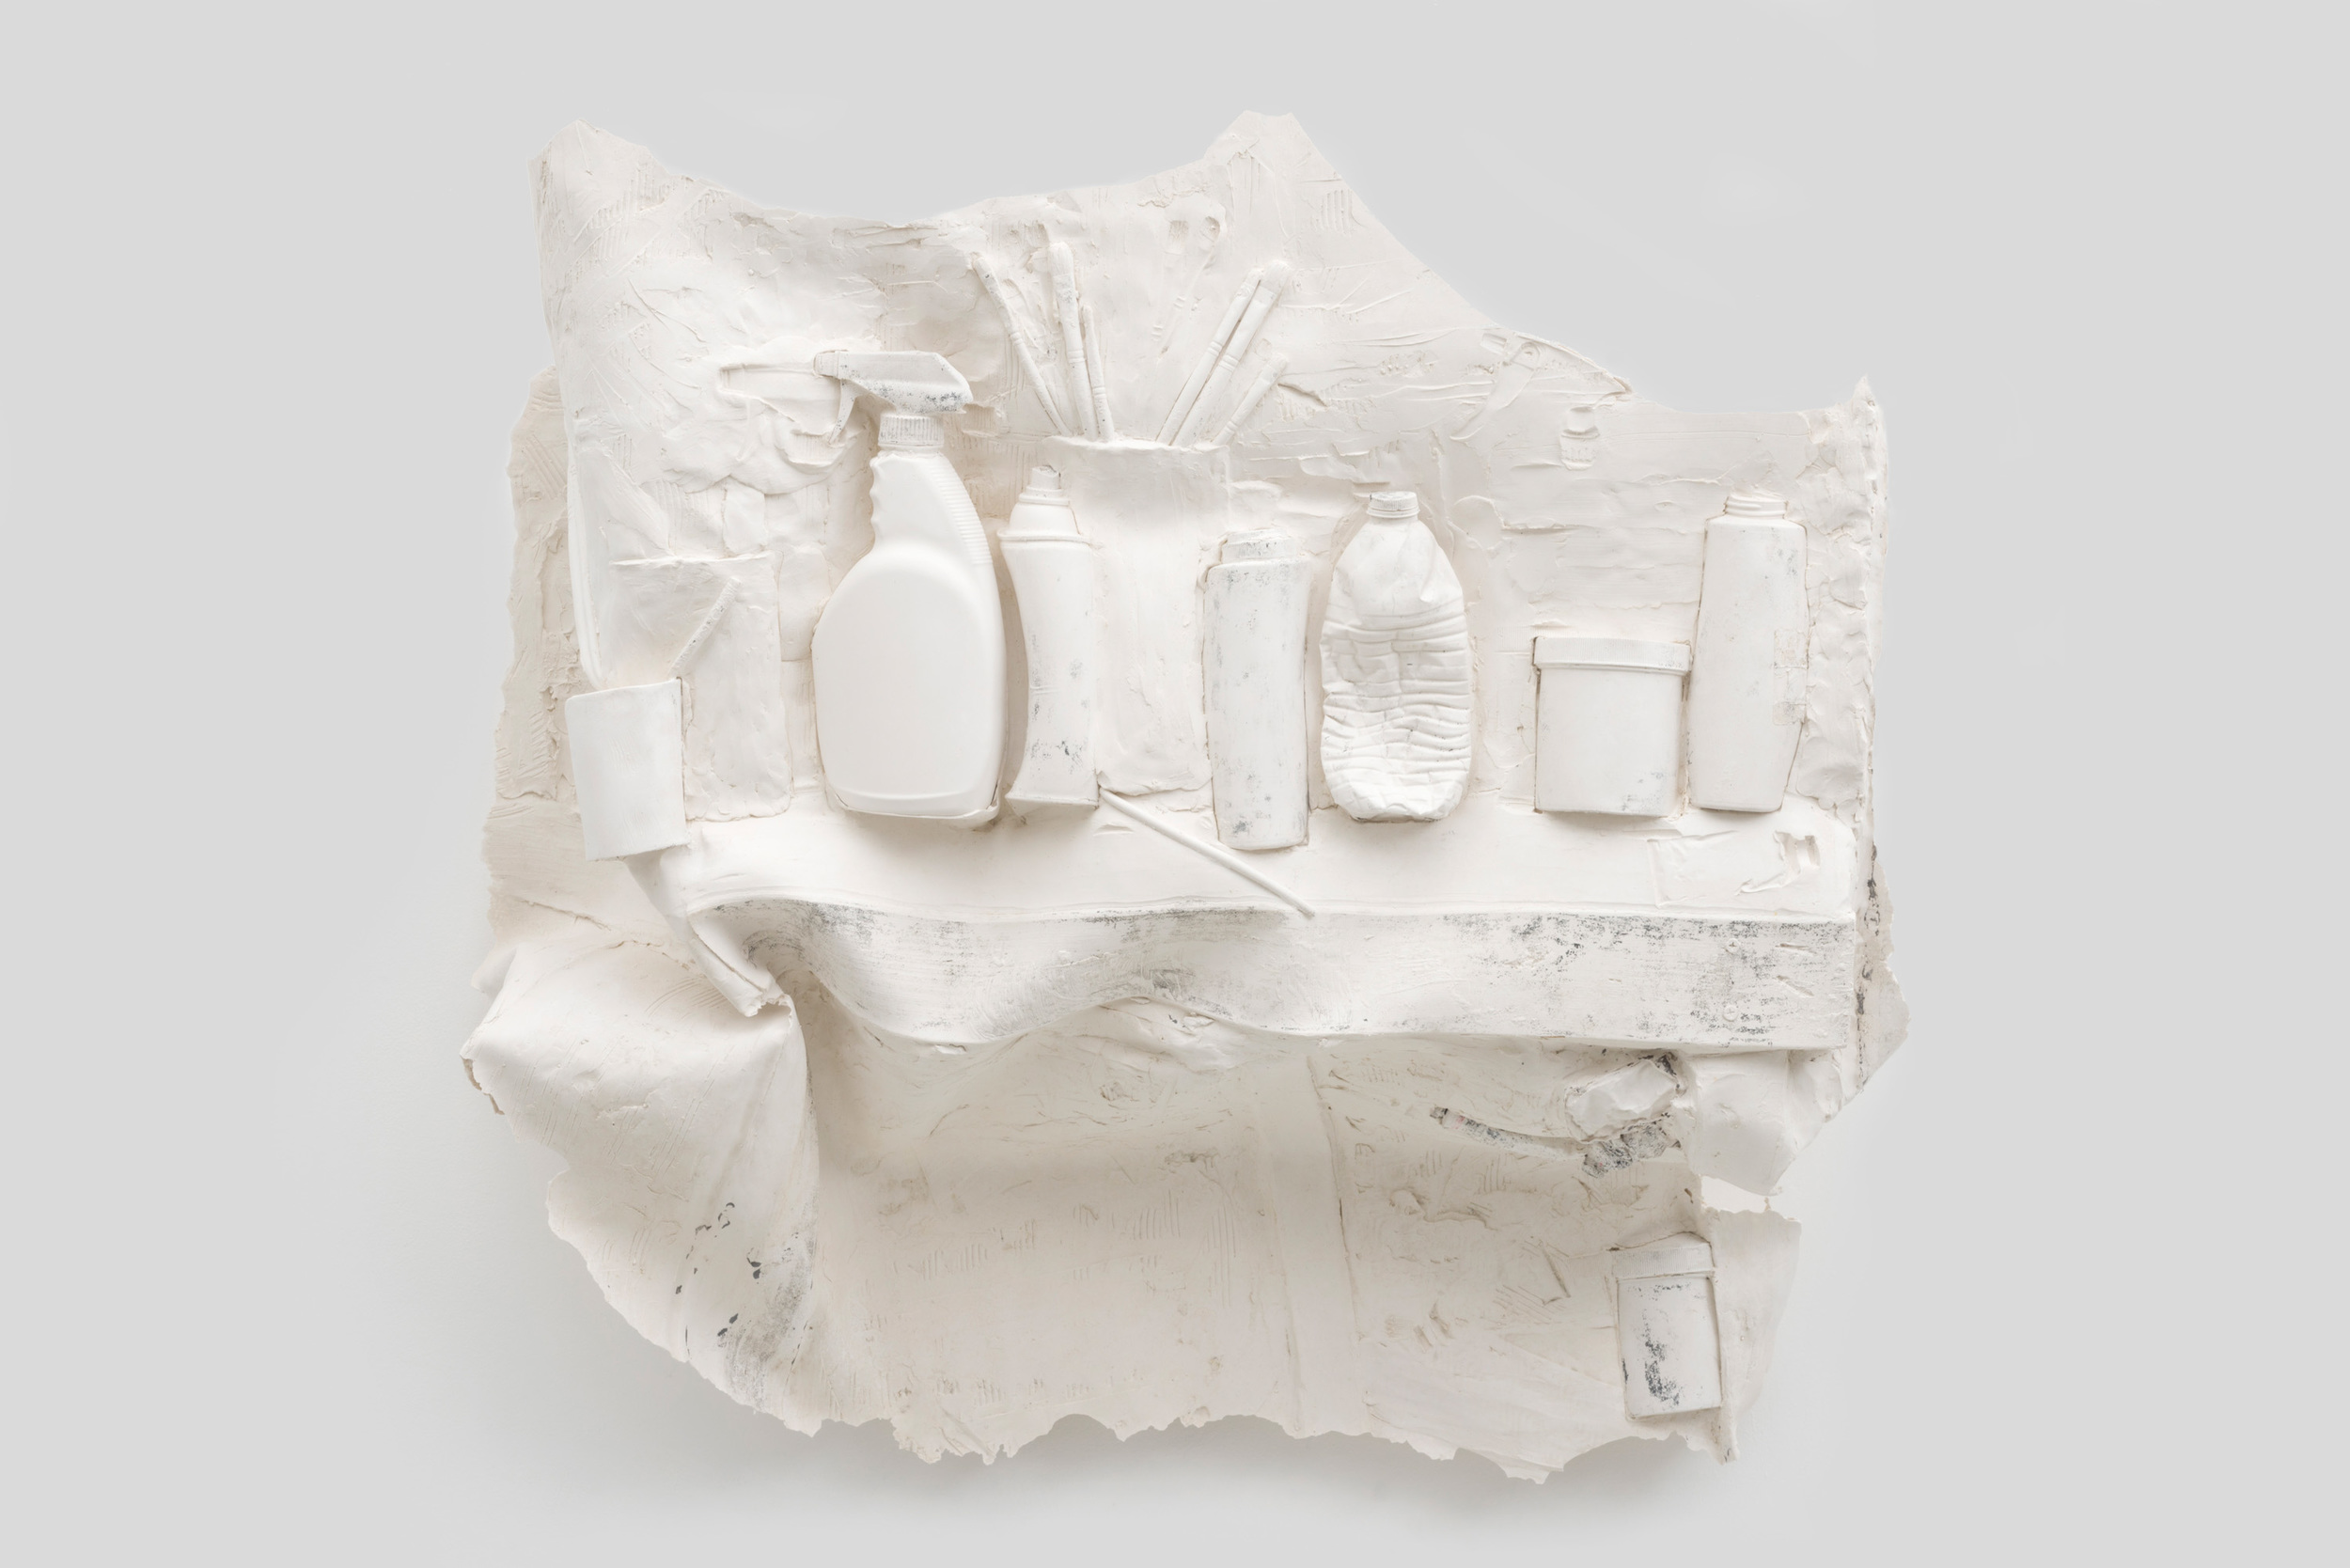   Shelved , 2014 Gypsum cement, fiberglass cloth, and wood 35 x 36 x 18 inches 